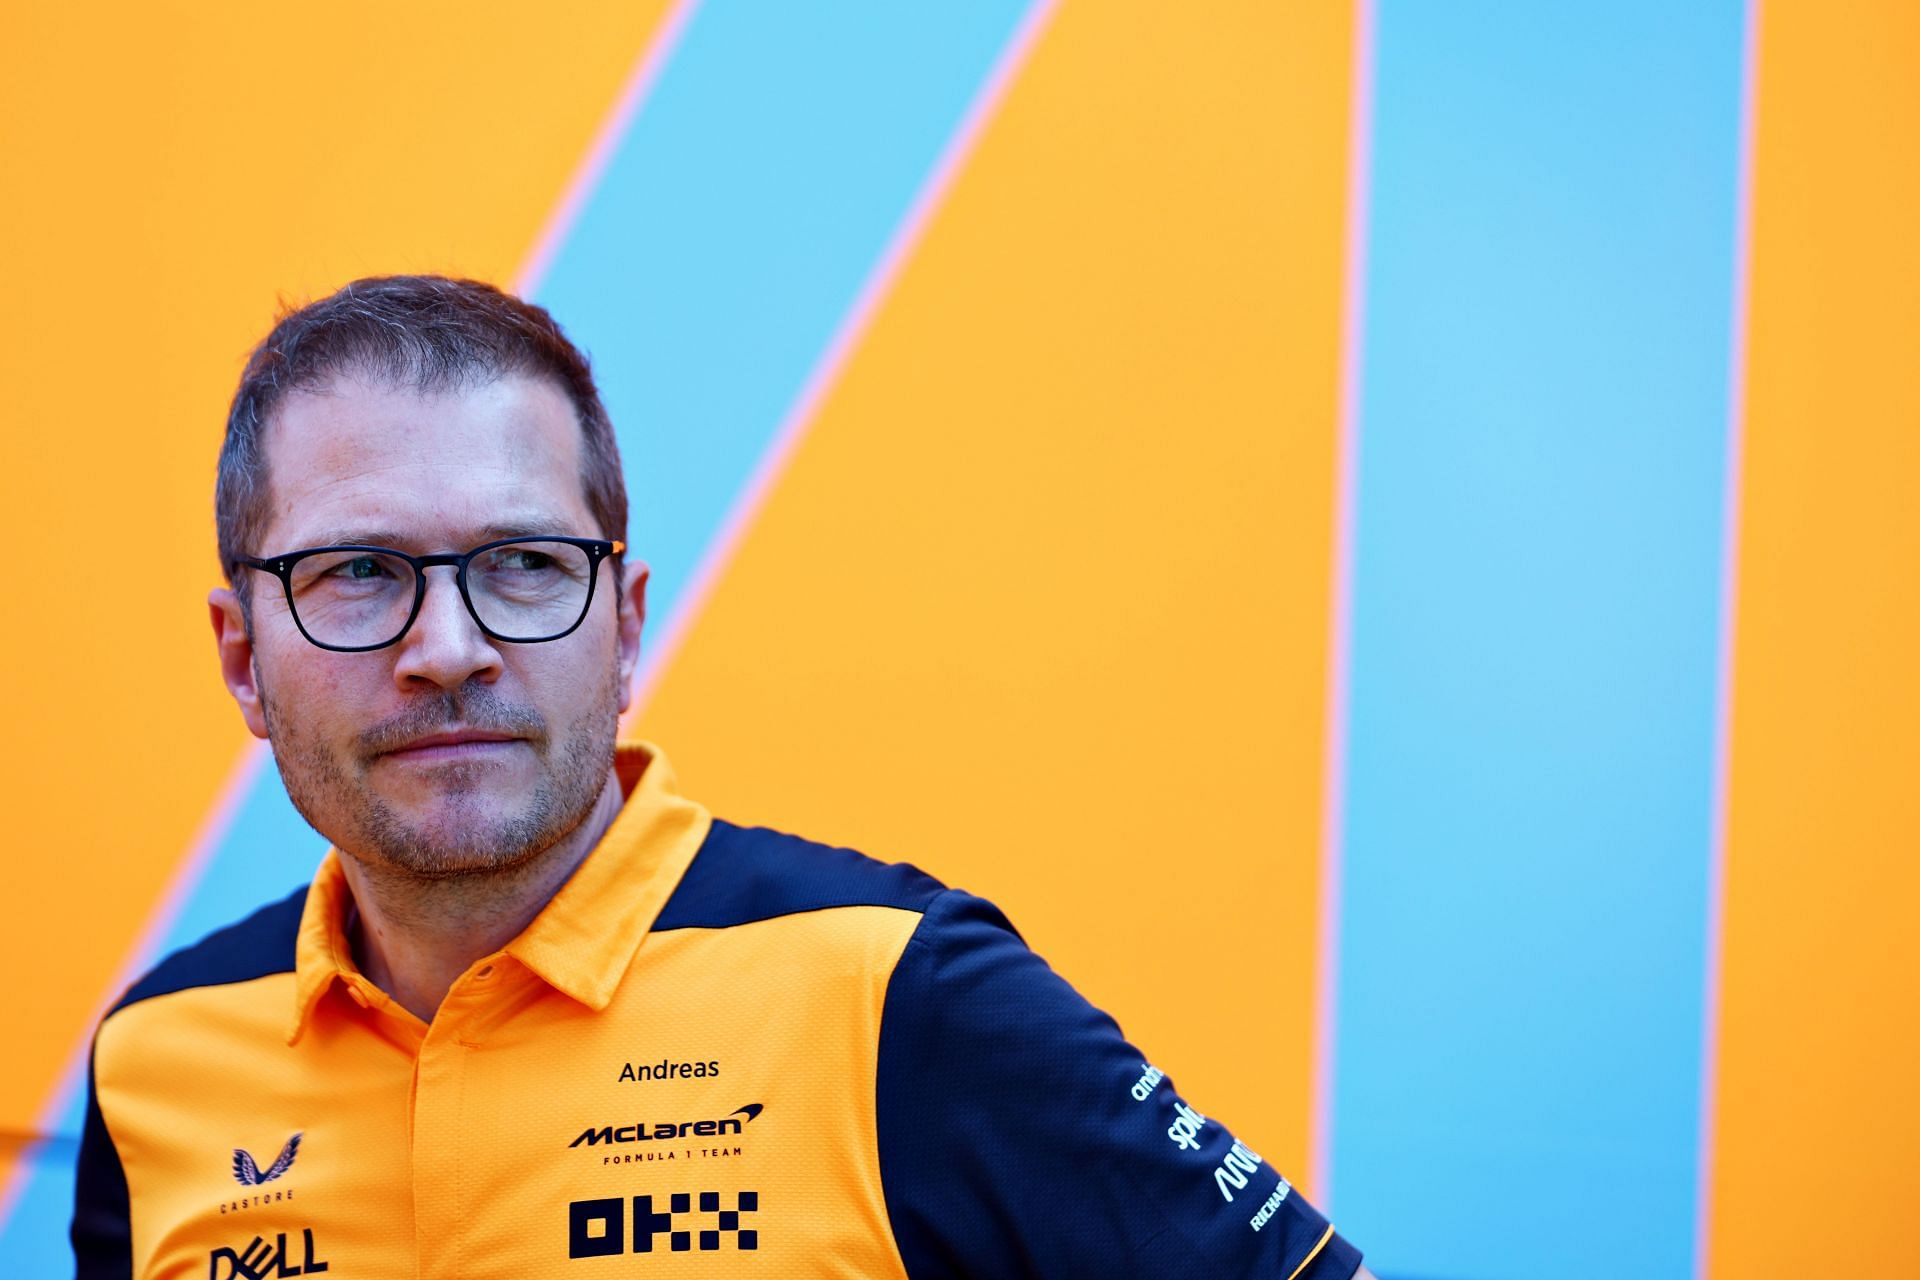 McLaren Team Principal Andreas Seidl at the F1 Grand Prix of France at Circuit Paul Ricard on July 21, 2022 in Le Castellet, France. (Photo by Mark Thompson/Getty Images)